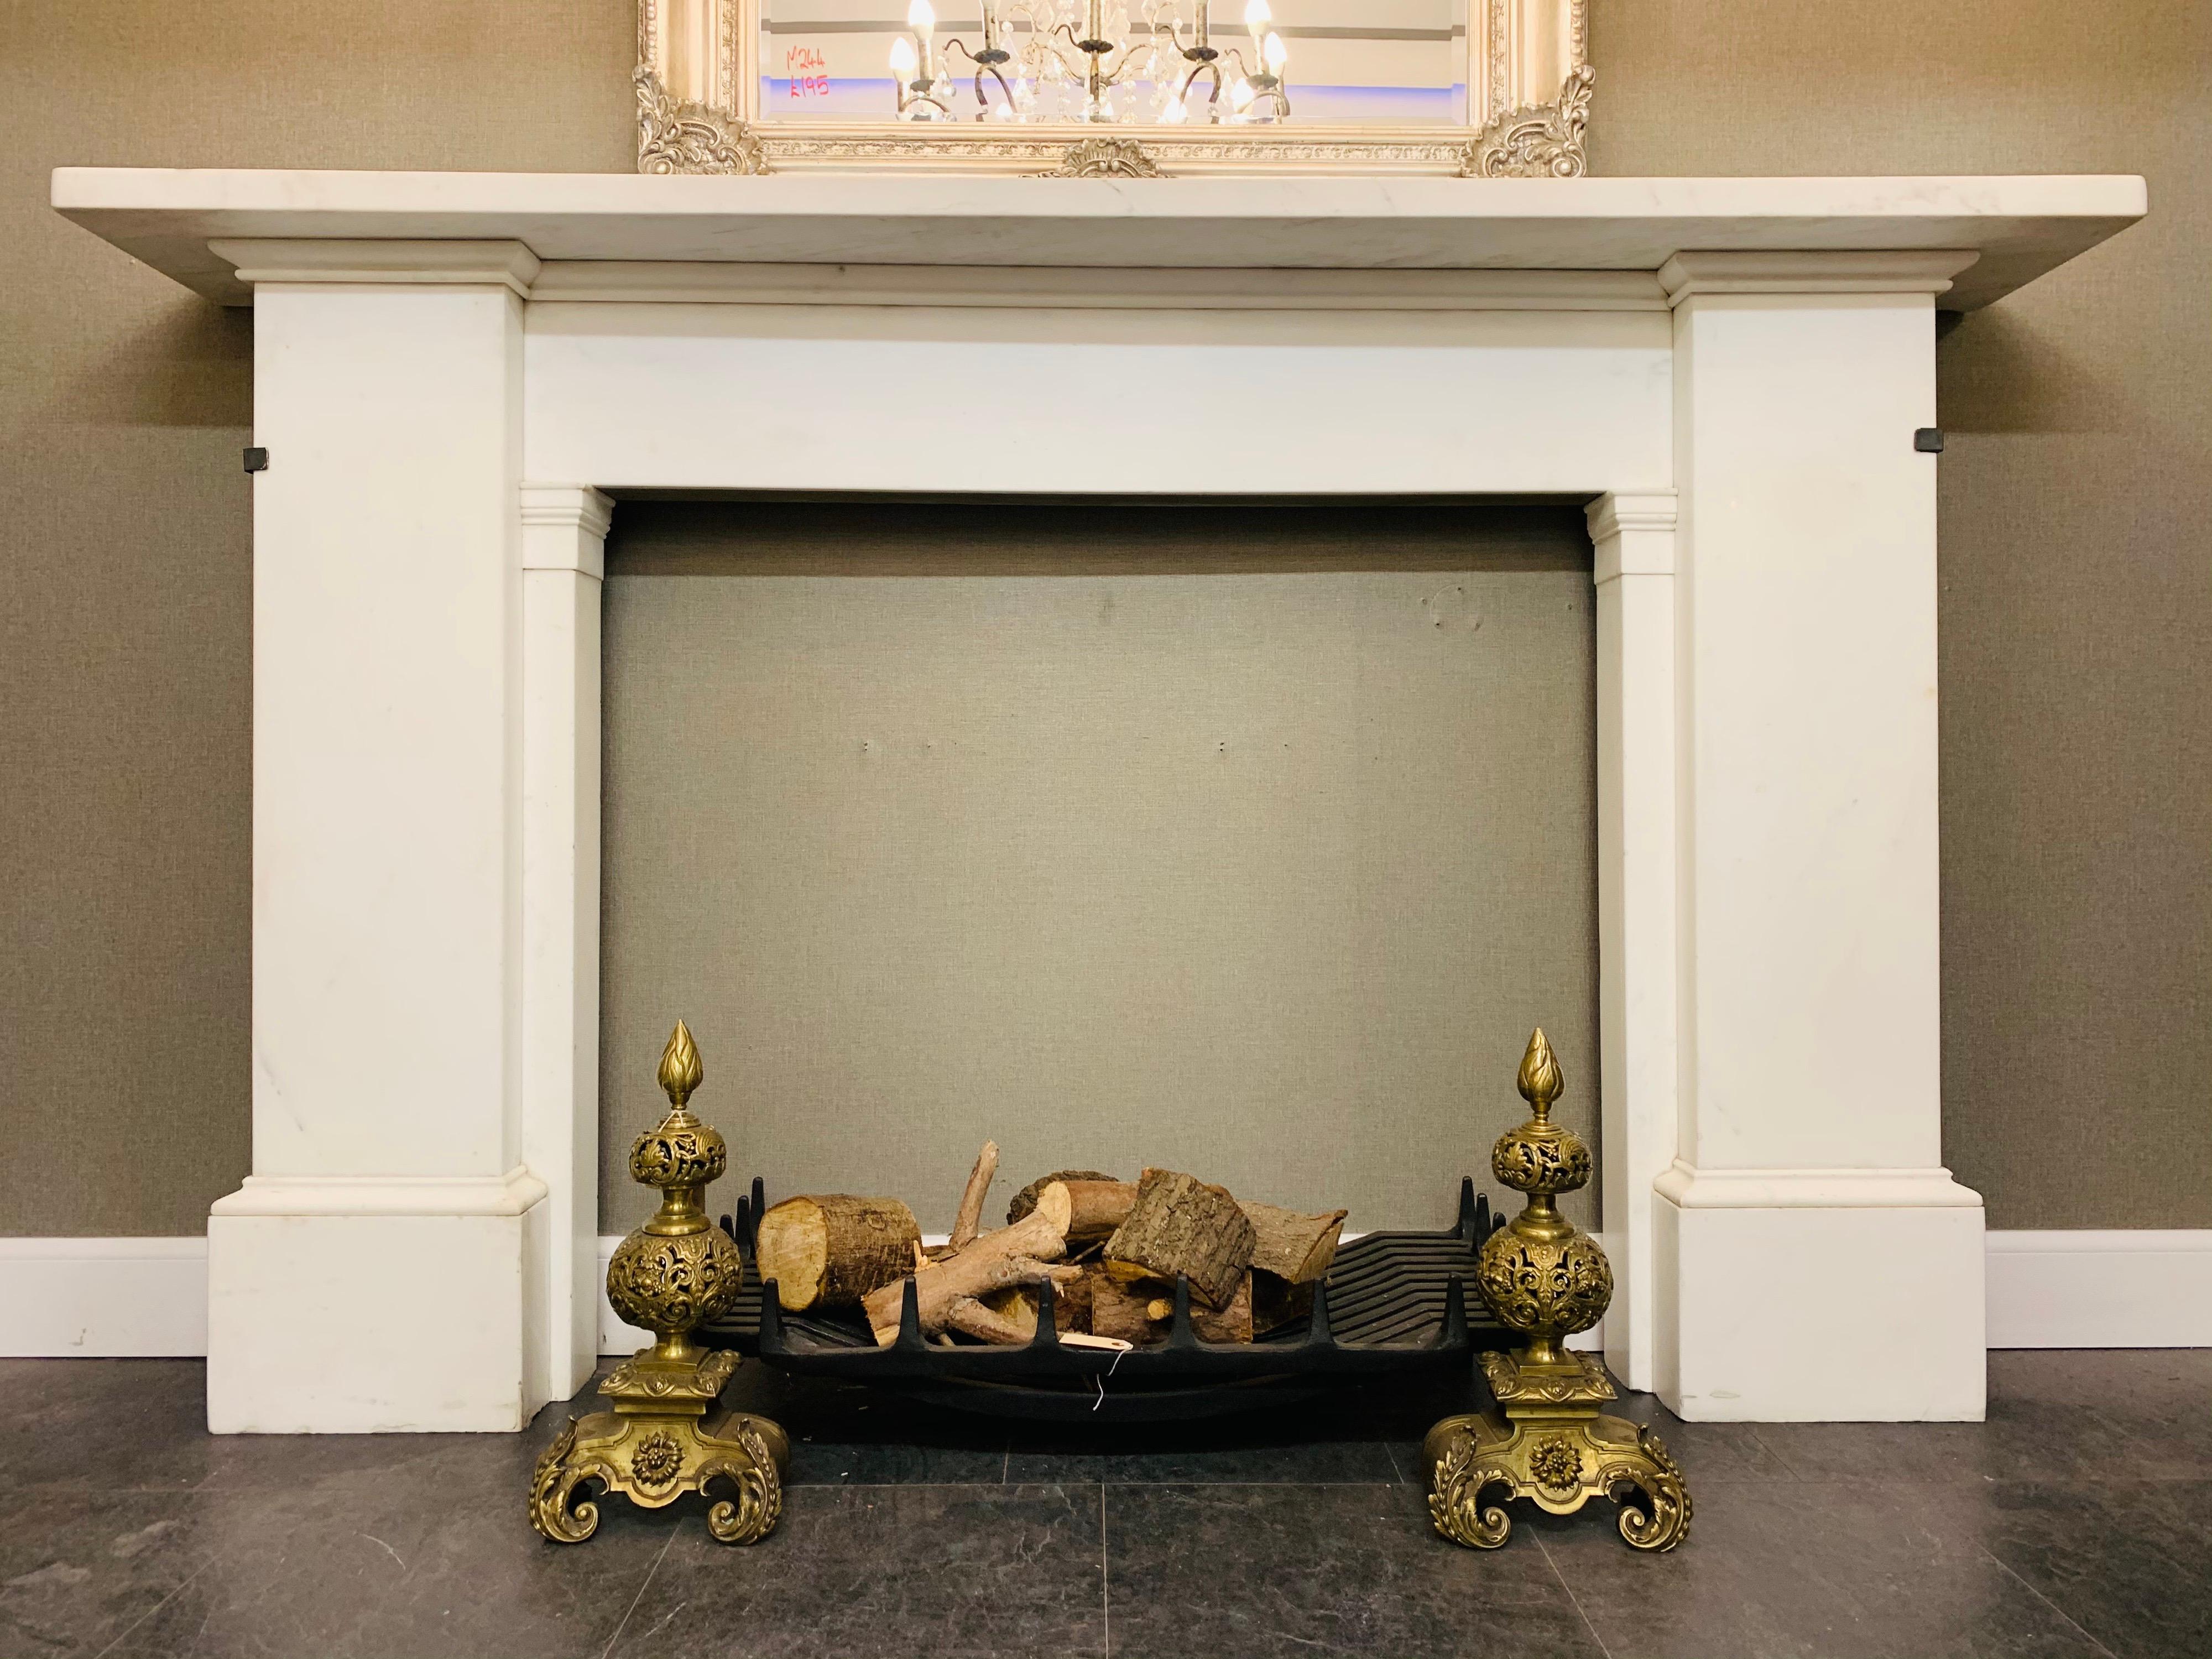 An early 1830 19th century Georgian monumental Scottish statuary marble fireplace surround of great importance. A very large and generous shelf sits above an anadorened frieze, flanked by large and tall jambs with wrap around corvetto moulding to